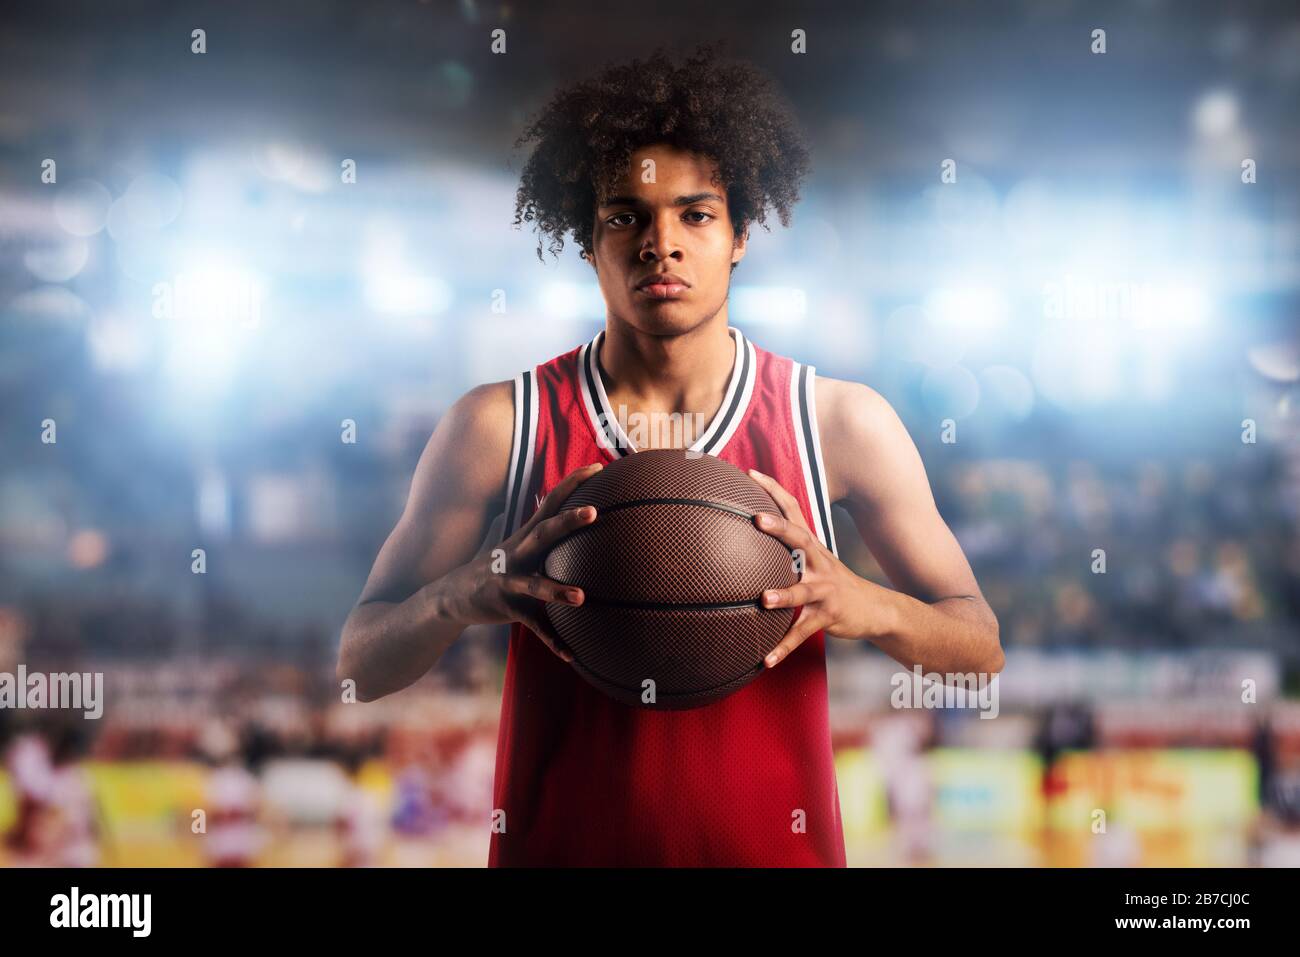 Basketball player holds the ball in the basket in the stadium full of spectators. Stock Photo